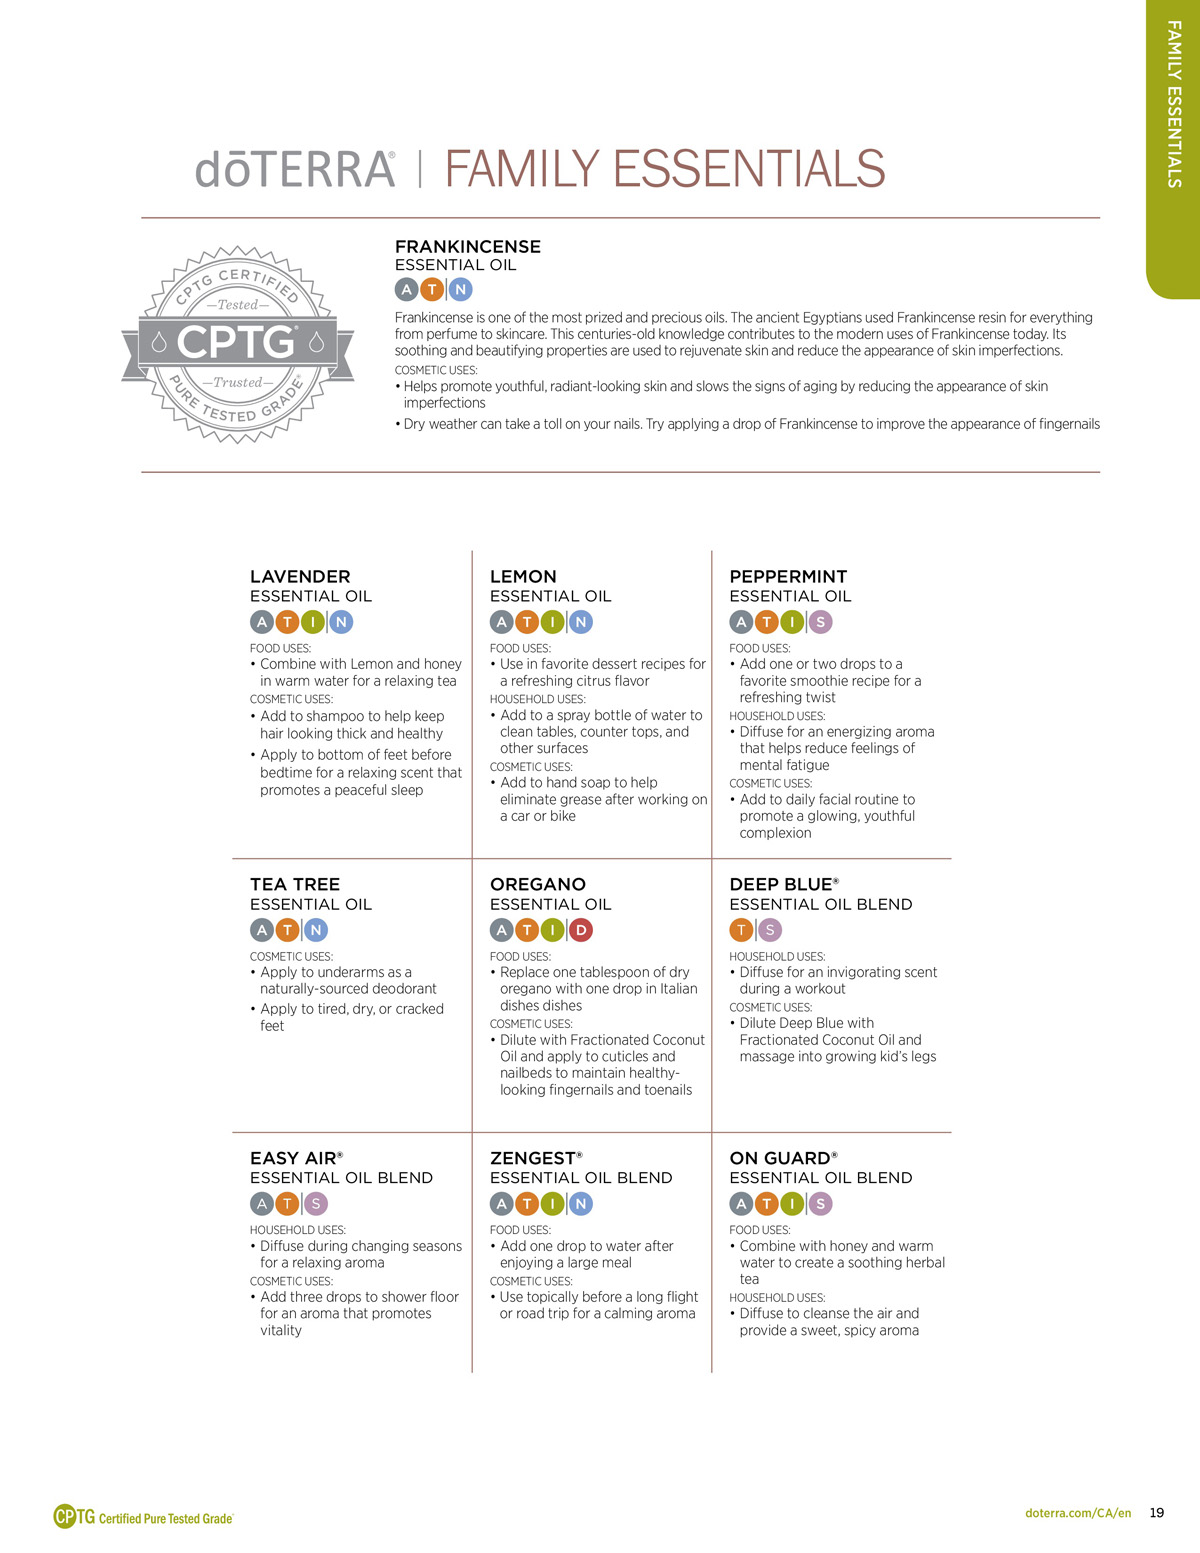 doterra product guide page 19